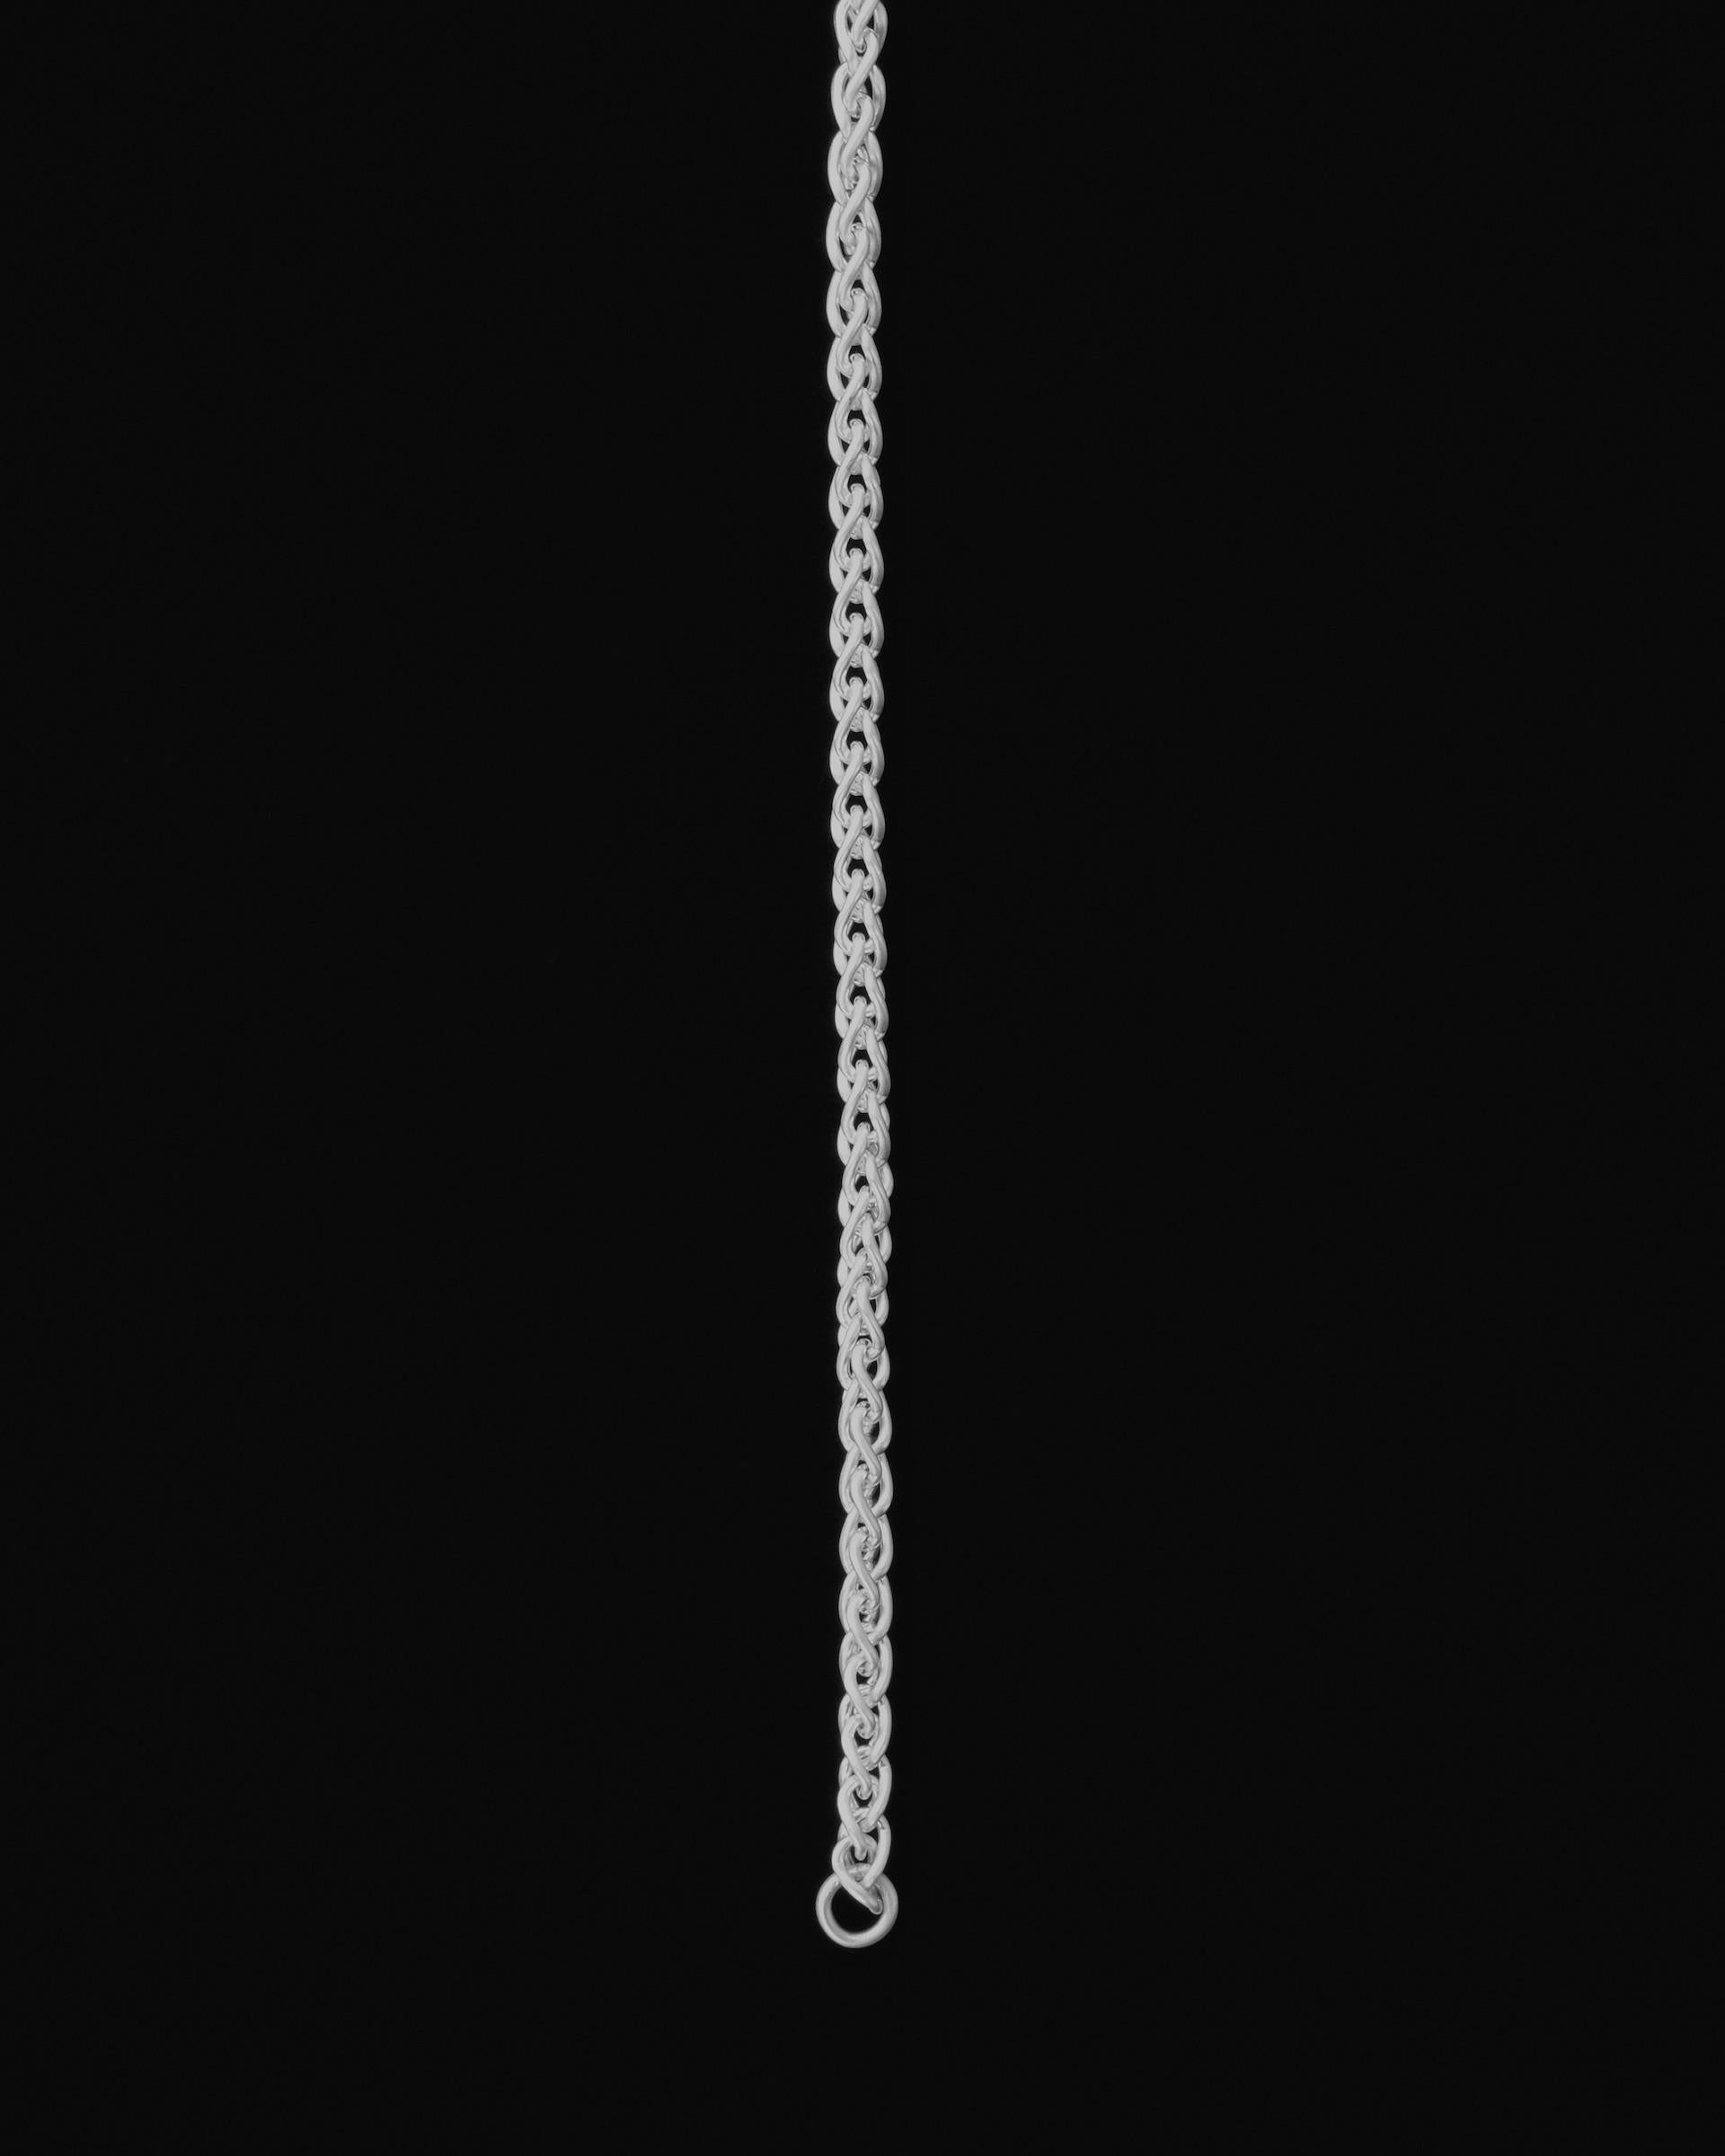 Artisan Tiana Marie Combes White Gold Woven Chain Anklet For Sale